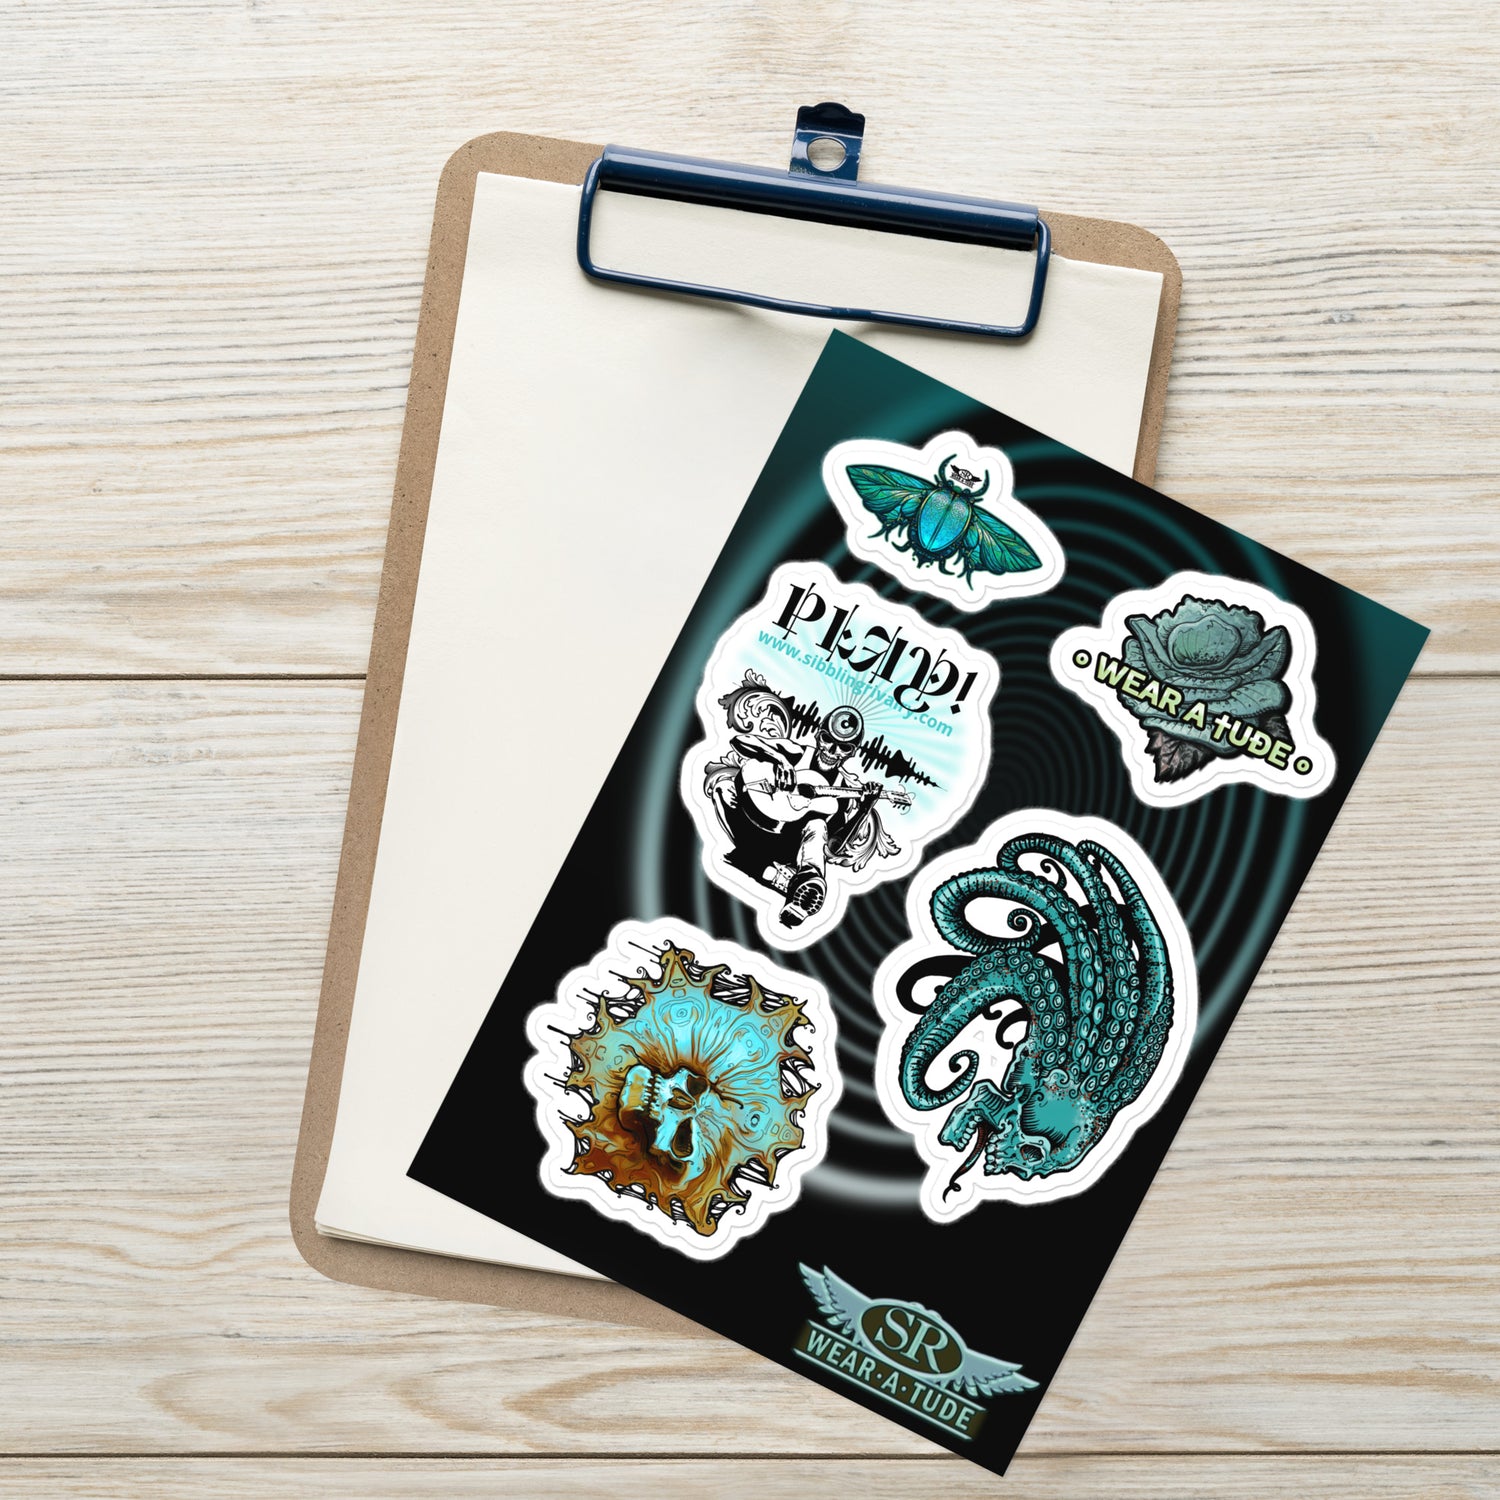 TURQUOISE ROCK stickers of skulls - SIB.BLING RIVALRY